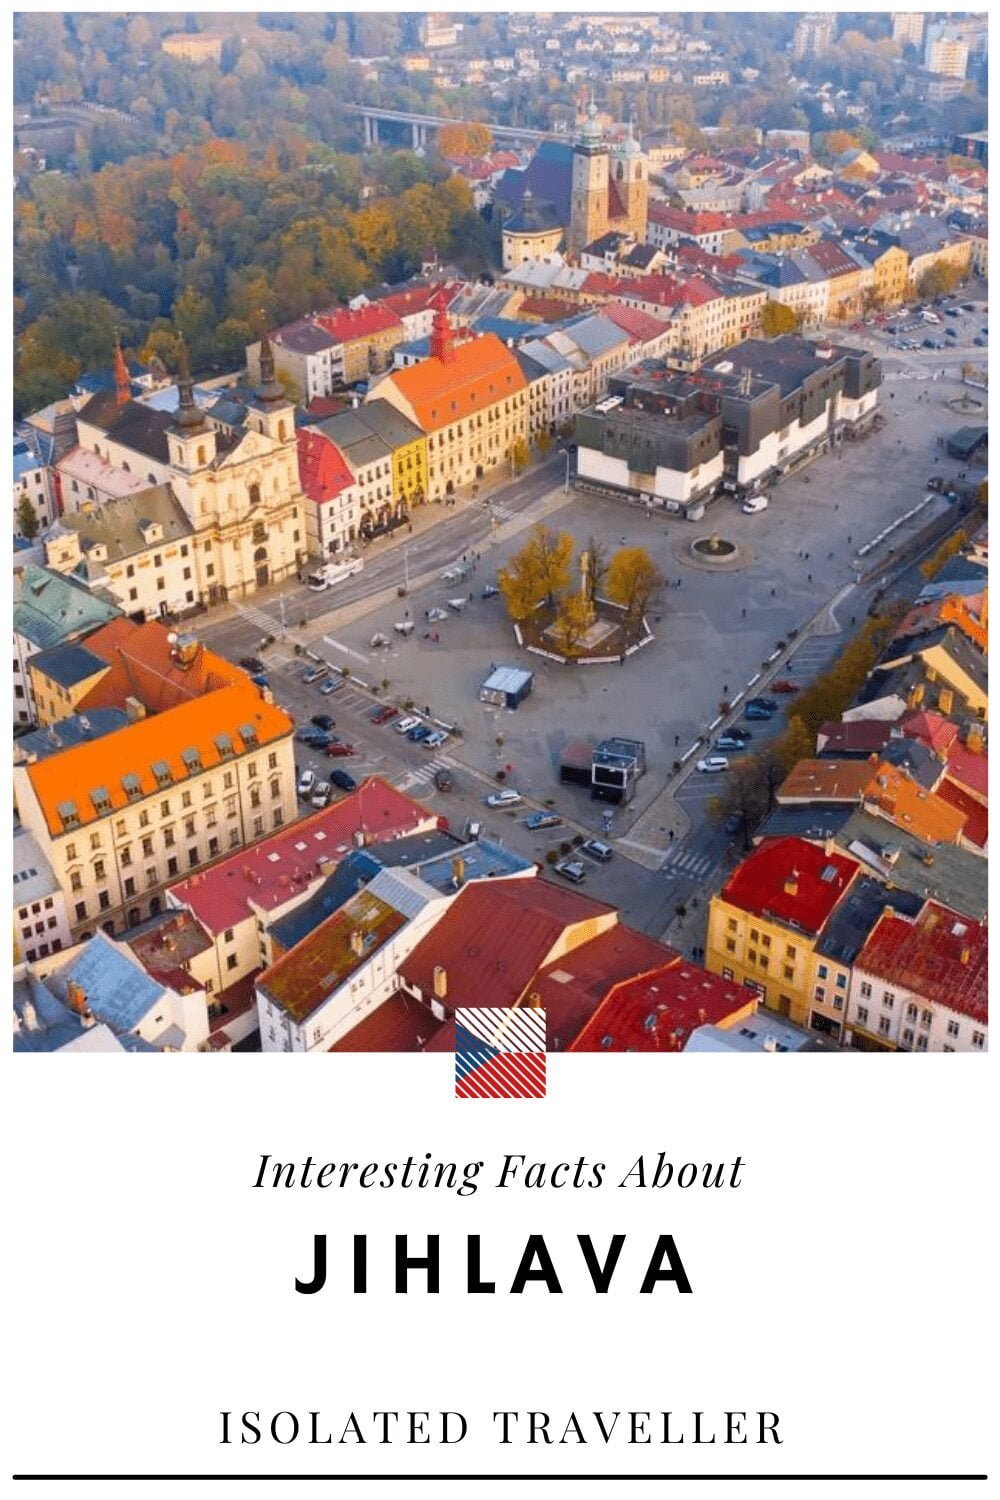 Facts About Jihlava